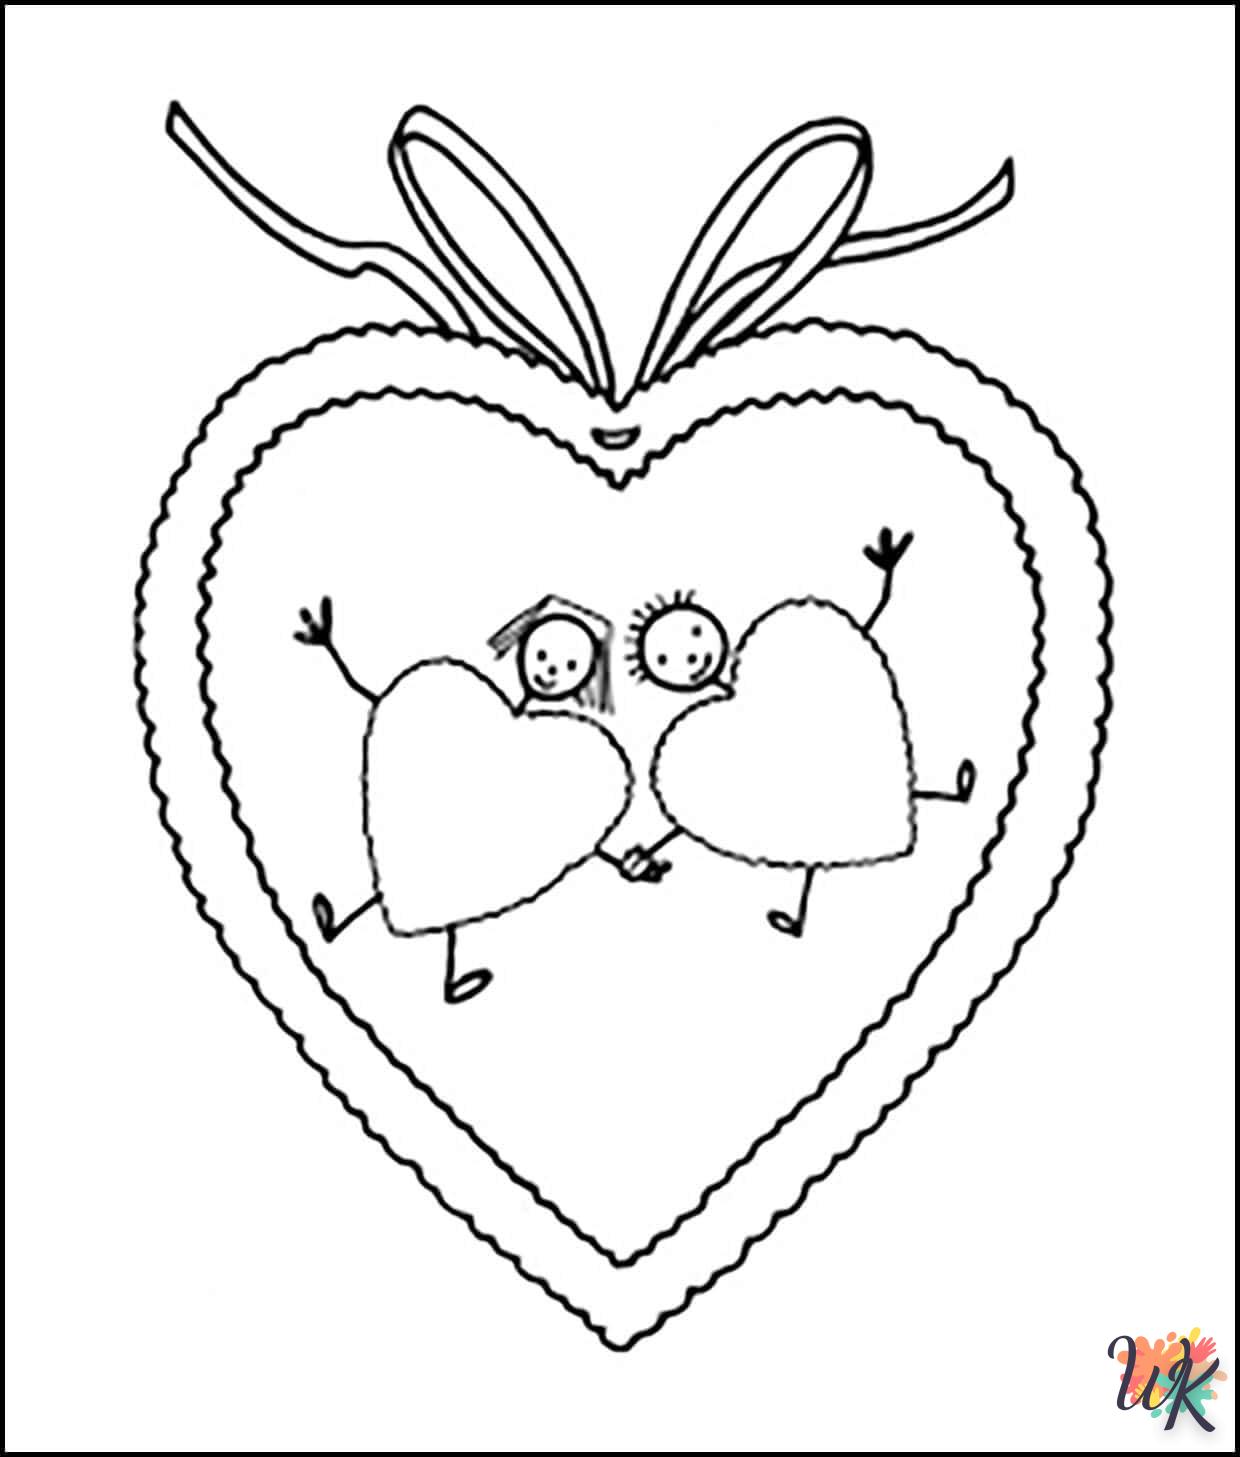 Heart coloring online to color